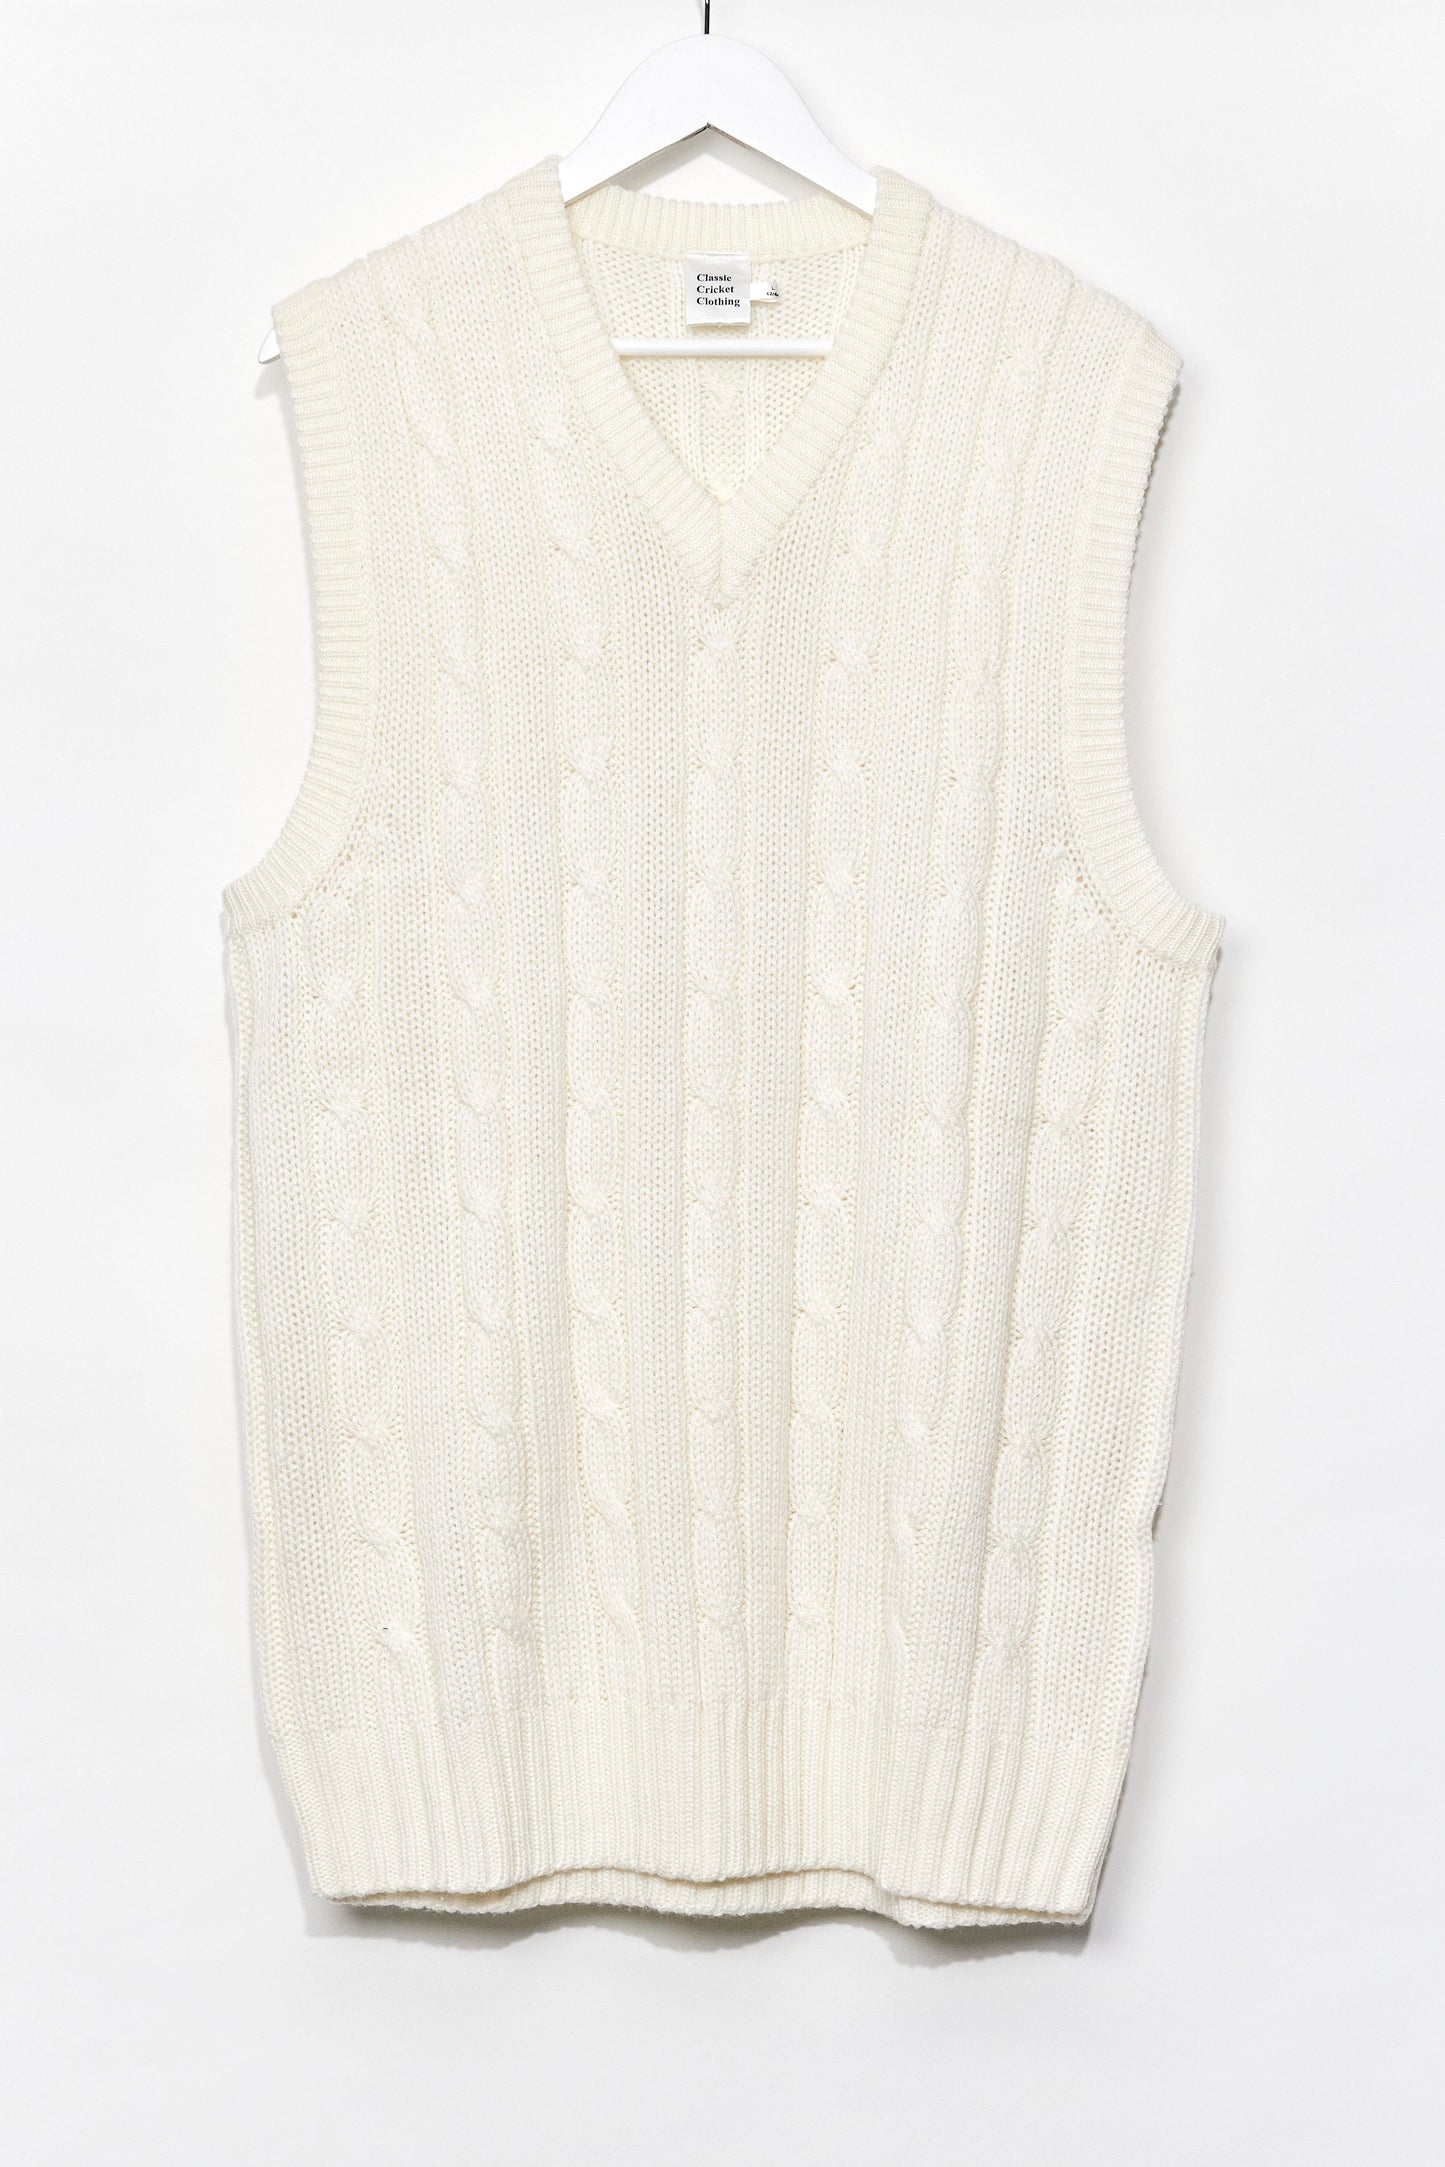 Mens Cream Knitted Cricket Vest size Large